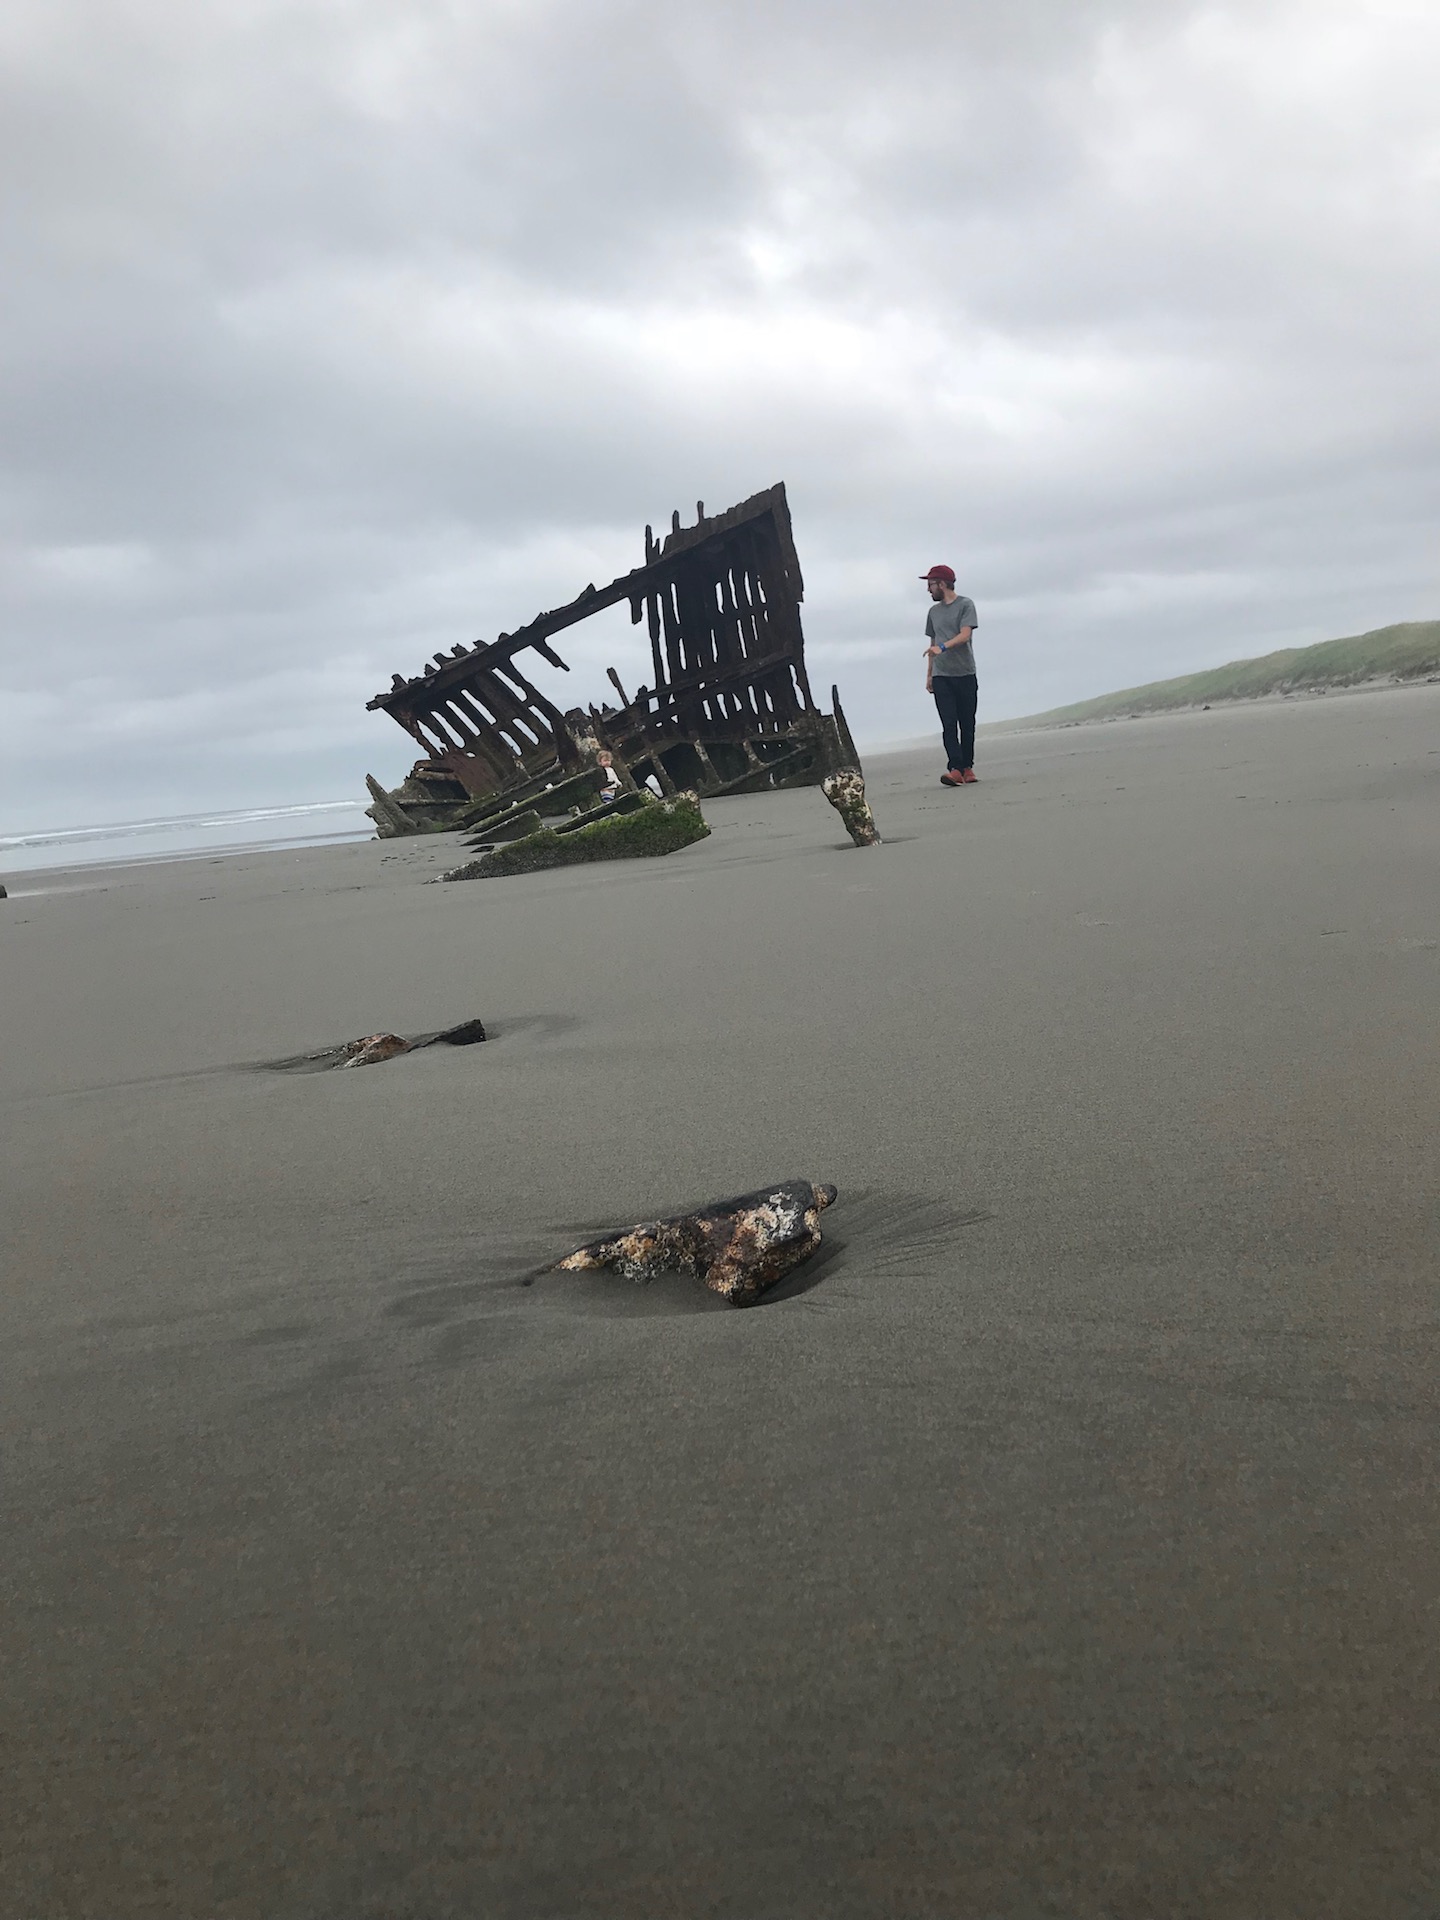 The ship wreckage and remains of the peter iredale